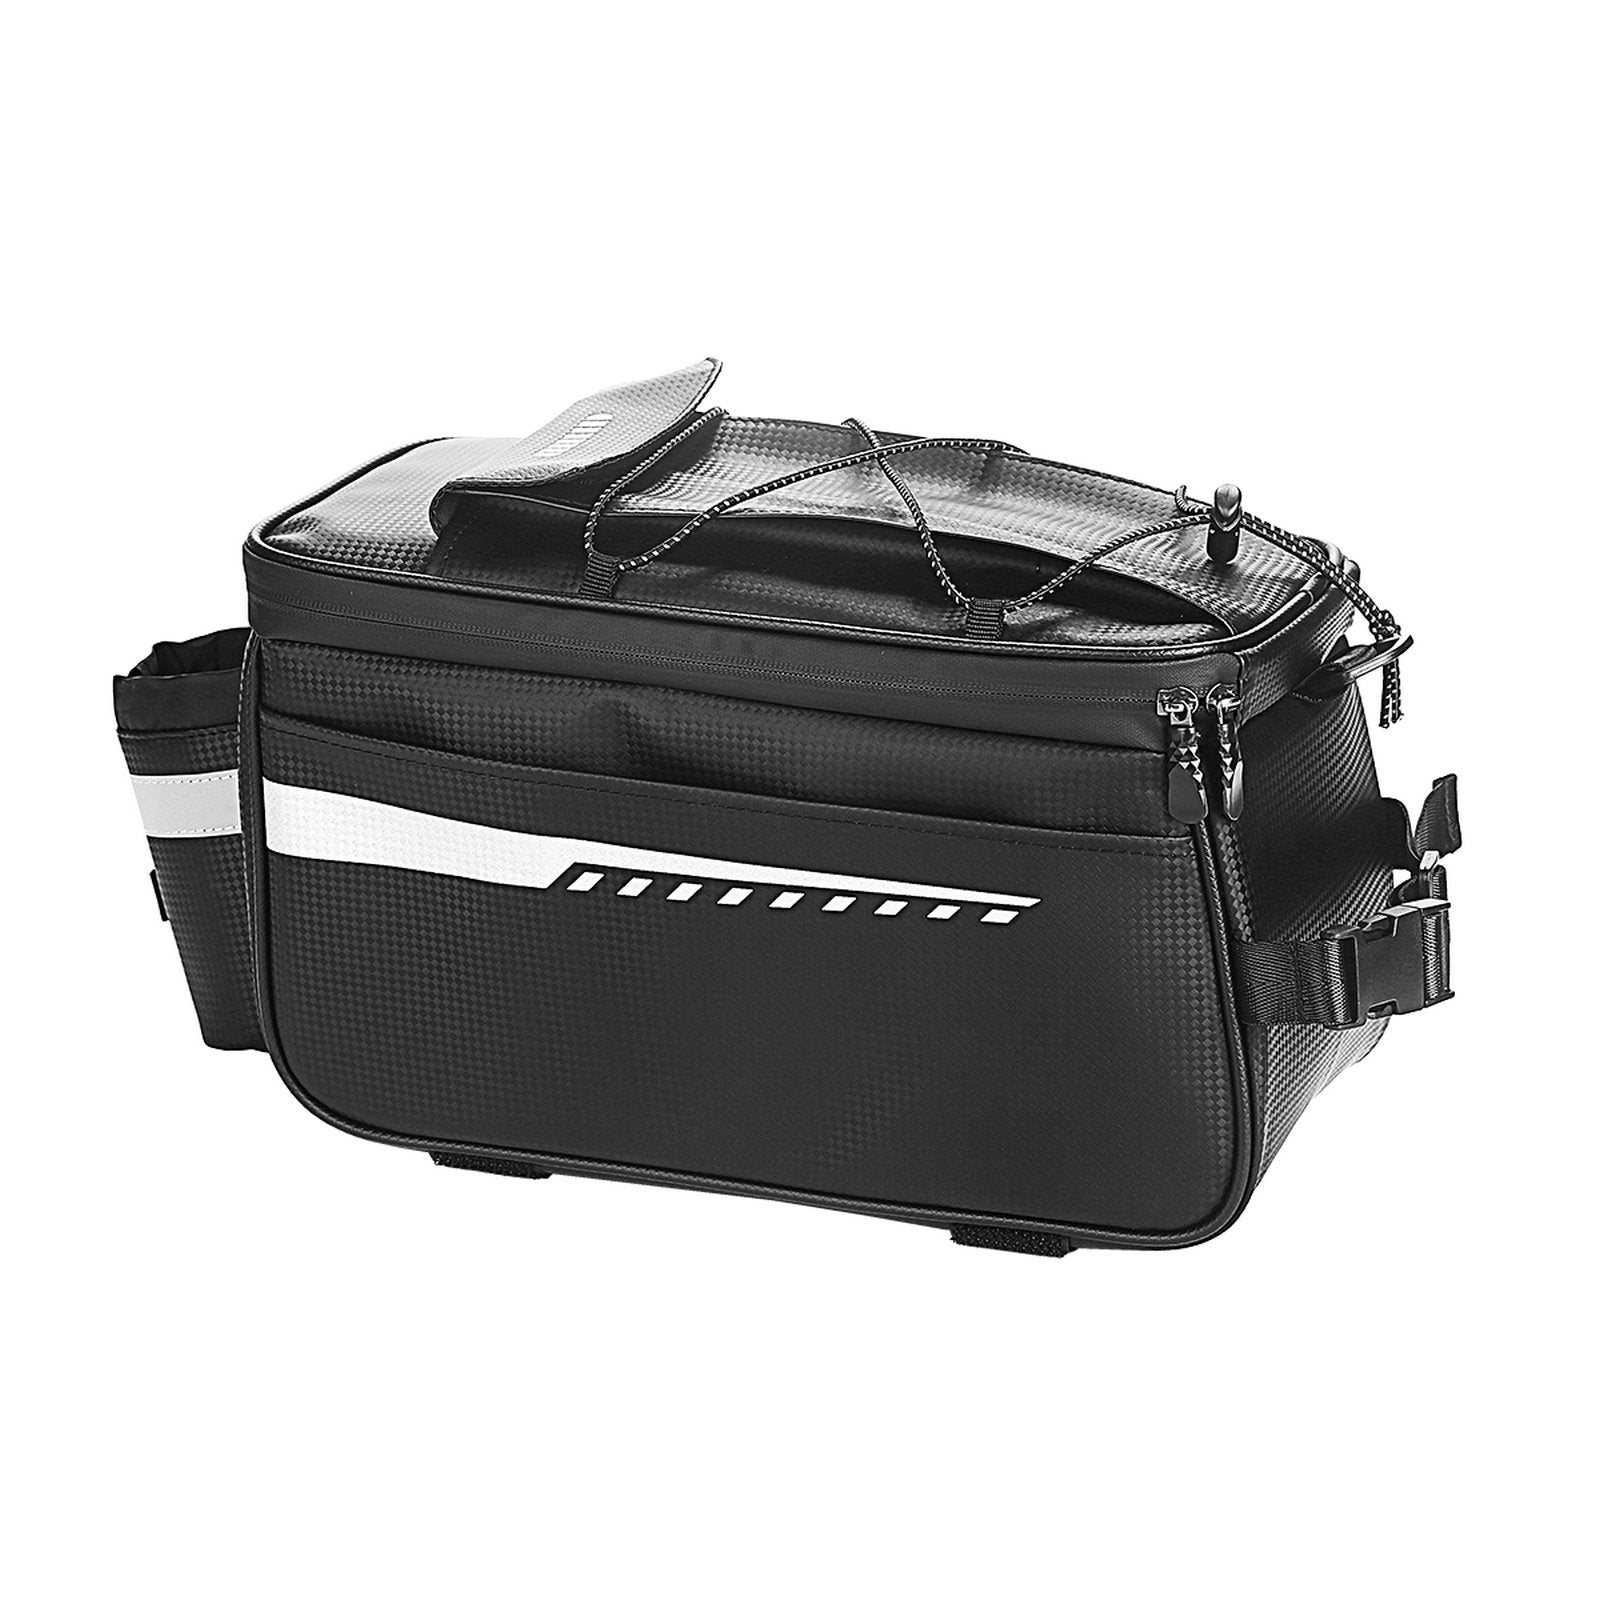 Bike Trunk Cooler Bag with Tail Light, Bicycle Rear Rack Bag with Insulated, Storage,  8L for Traveling Commuting Camping